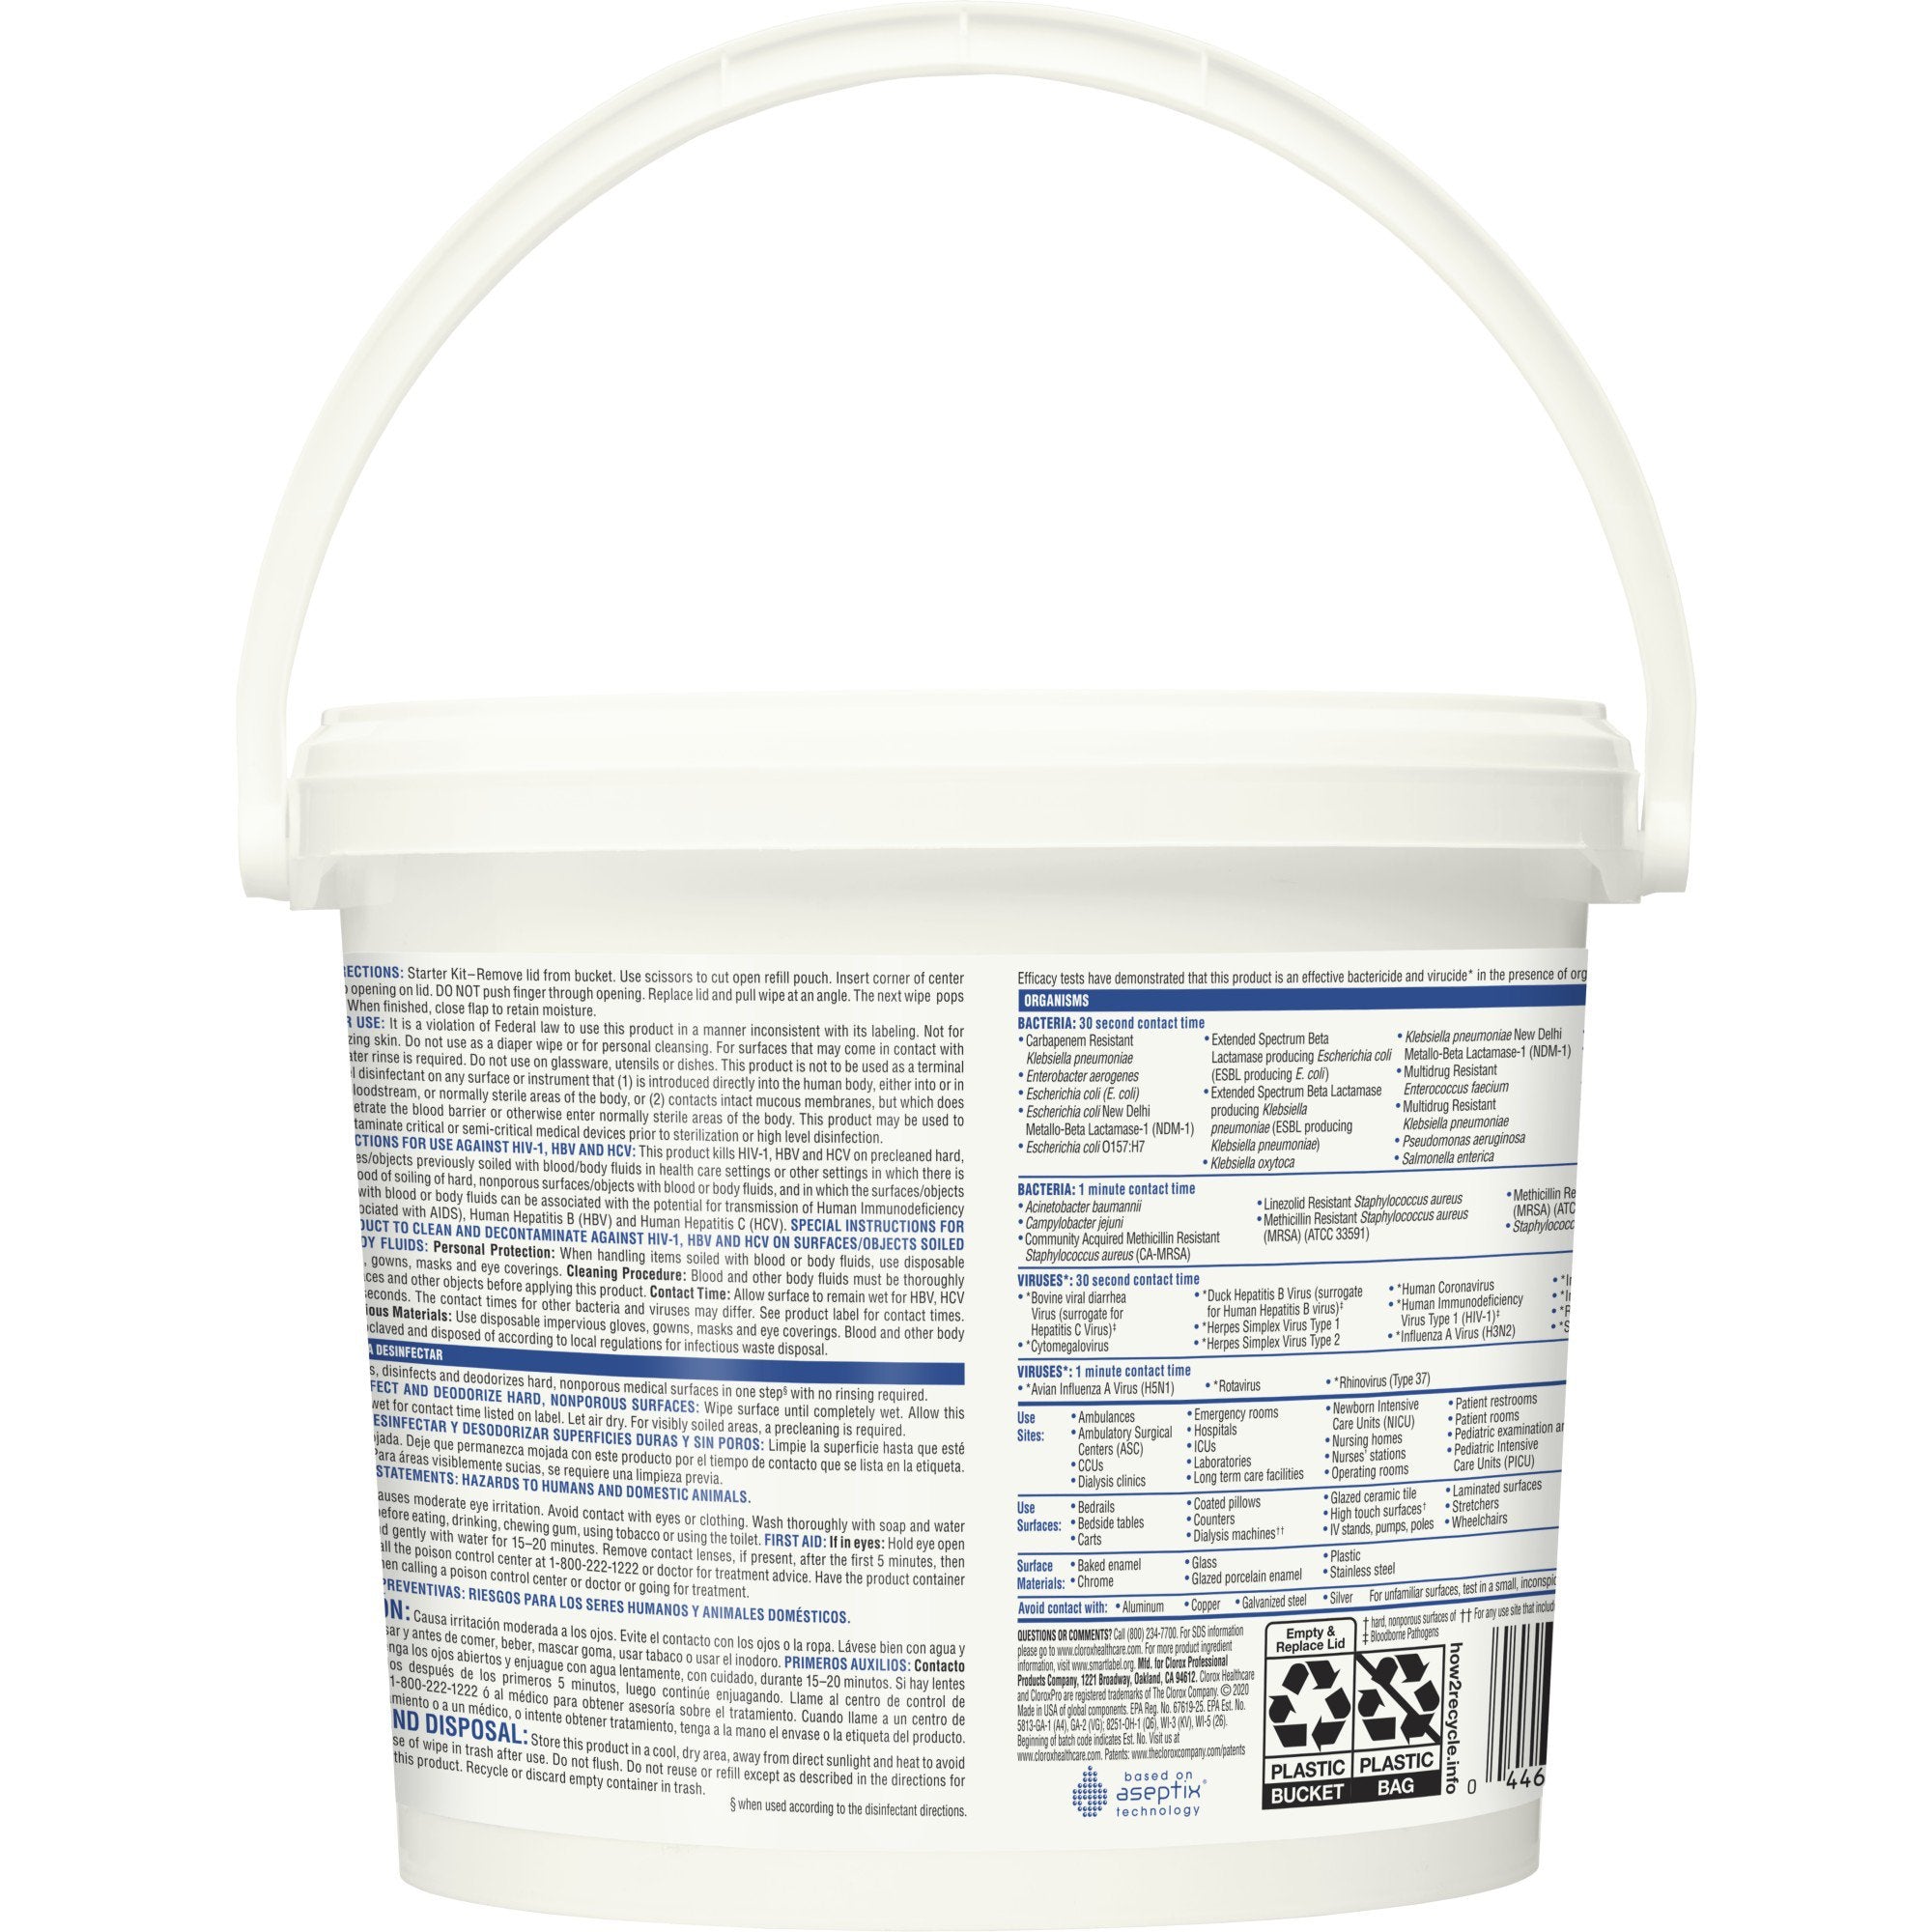 Clorox Healthcare® Surface Disinfectant Cleaner Premoistened Peroxide Based Manual Pull Wipe 185 Count Pail Unscented NonSterile